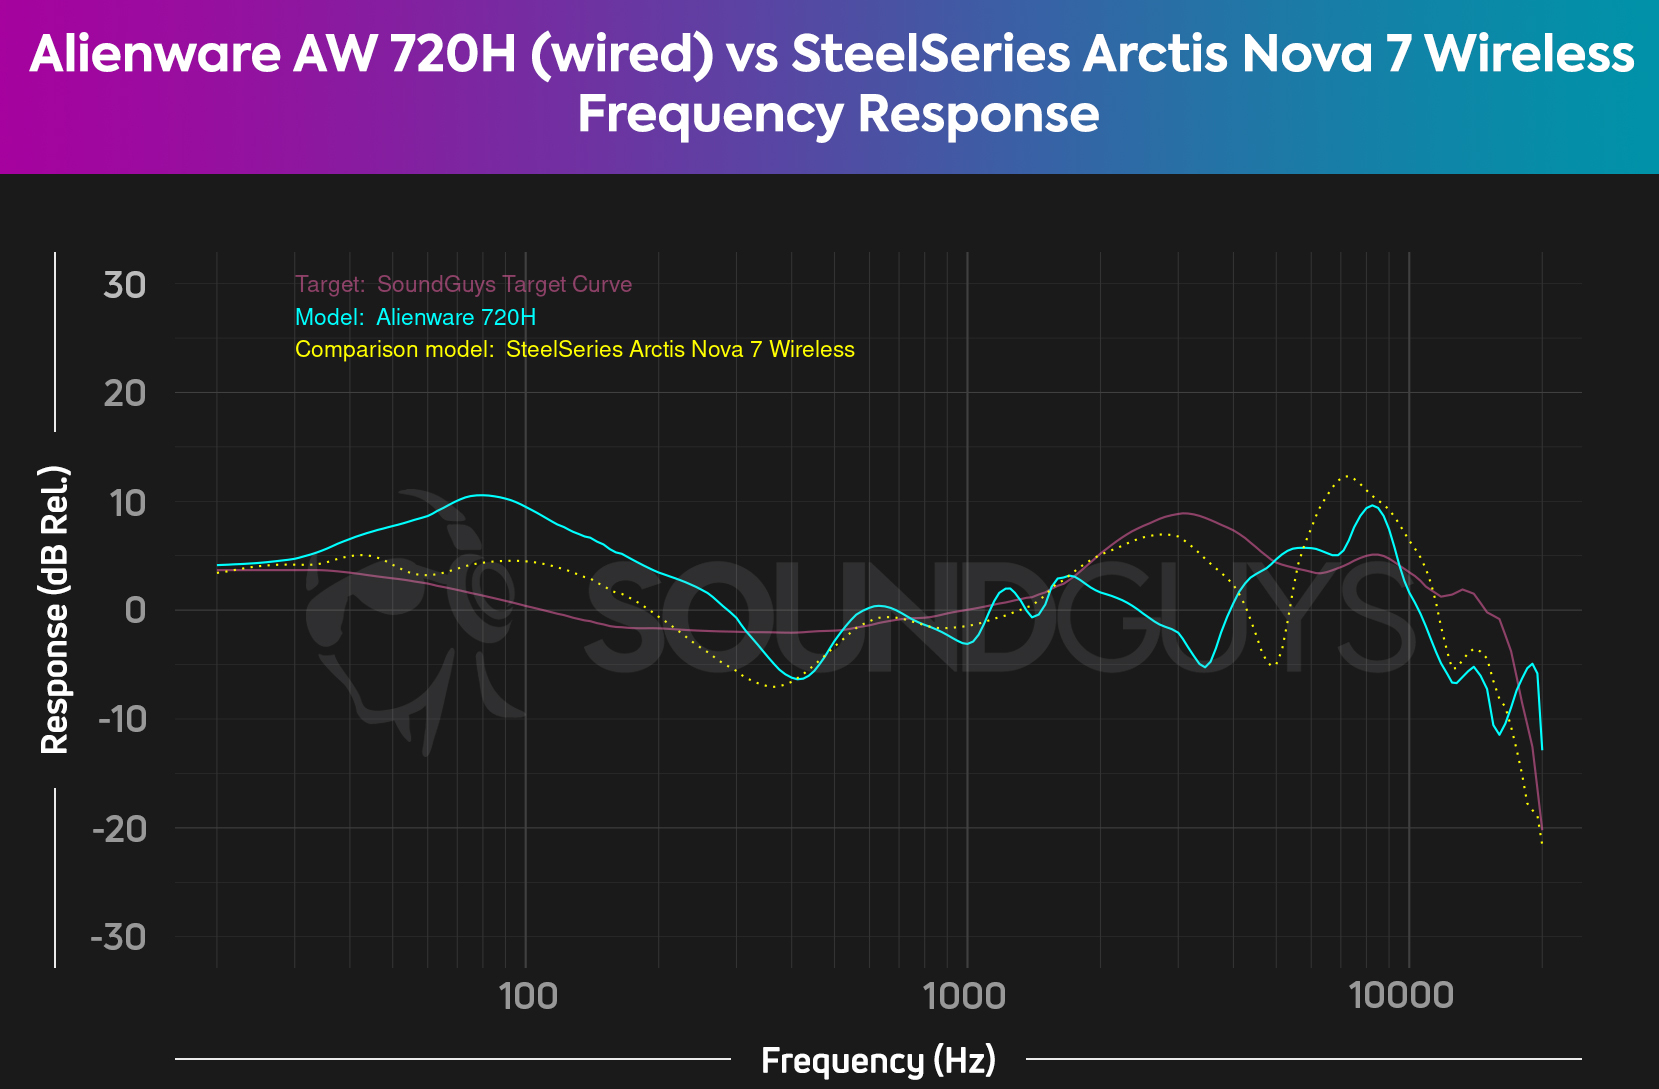 A comparison between the frequency response of the Alienware AW720H and the SteelSeries Nova 7 Wireless. With both having similar exaggerations and dips. 